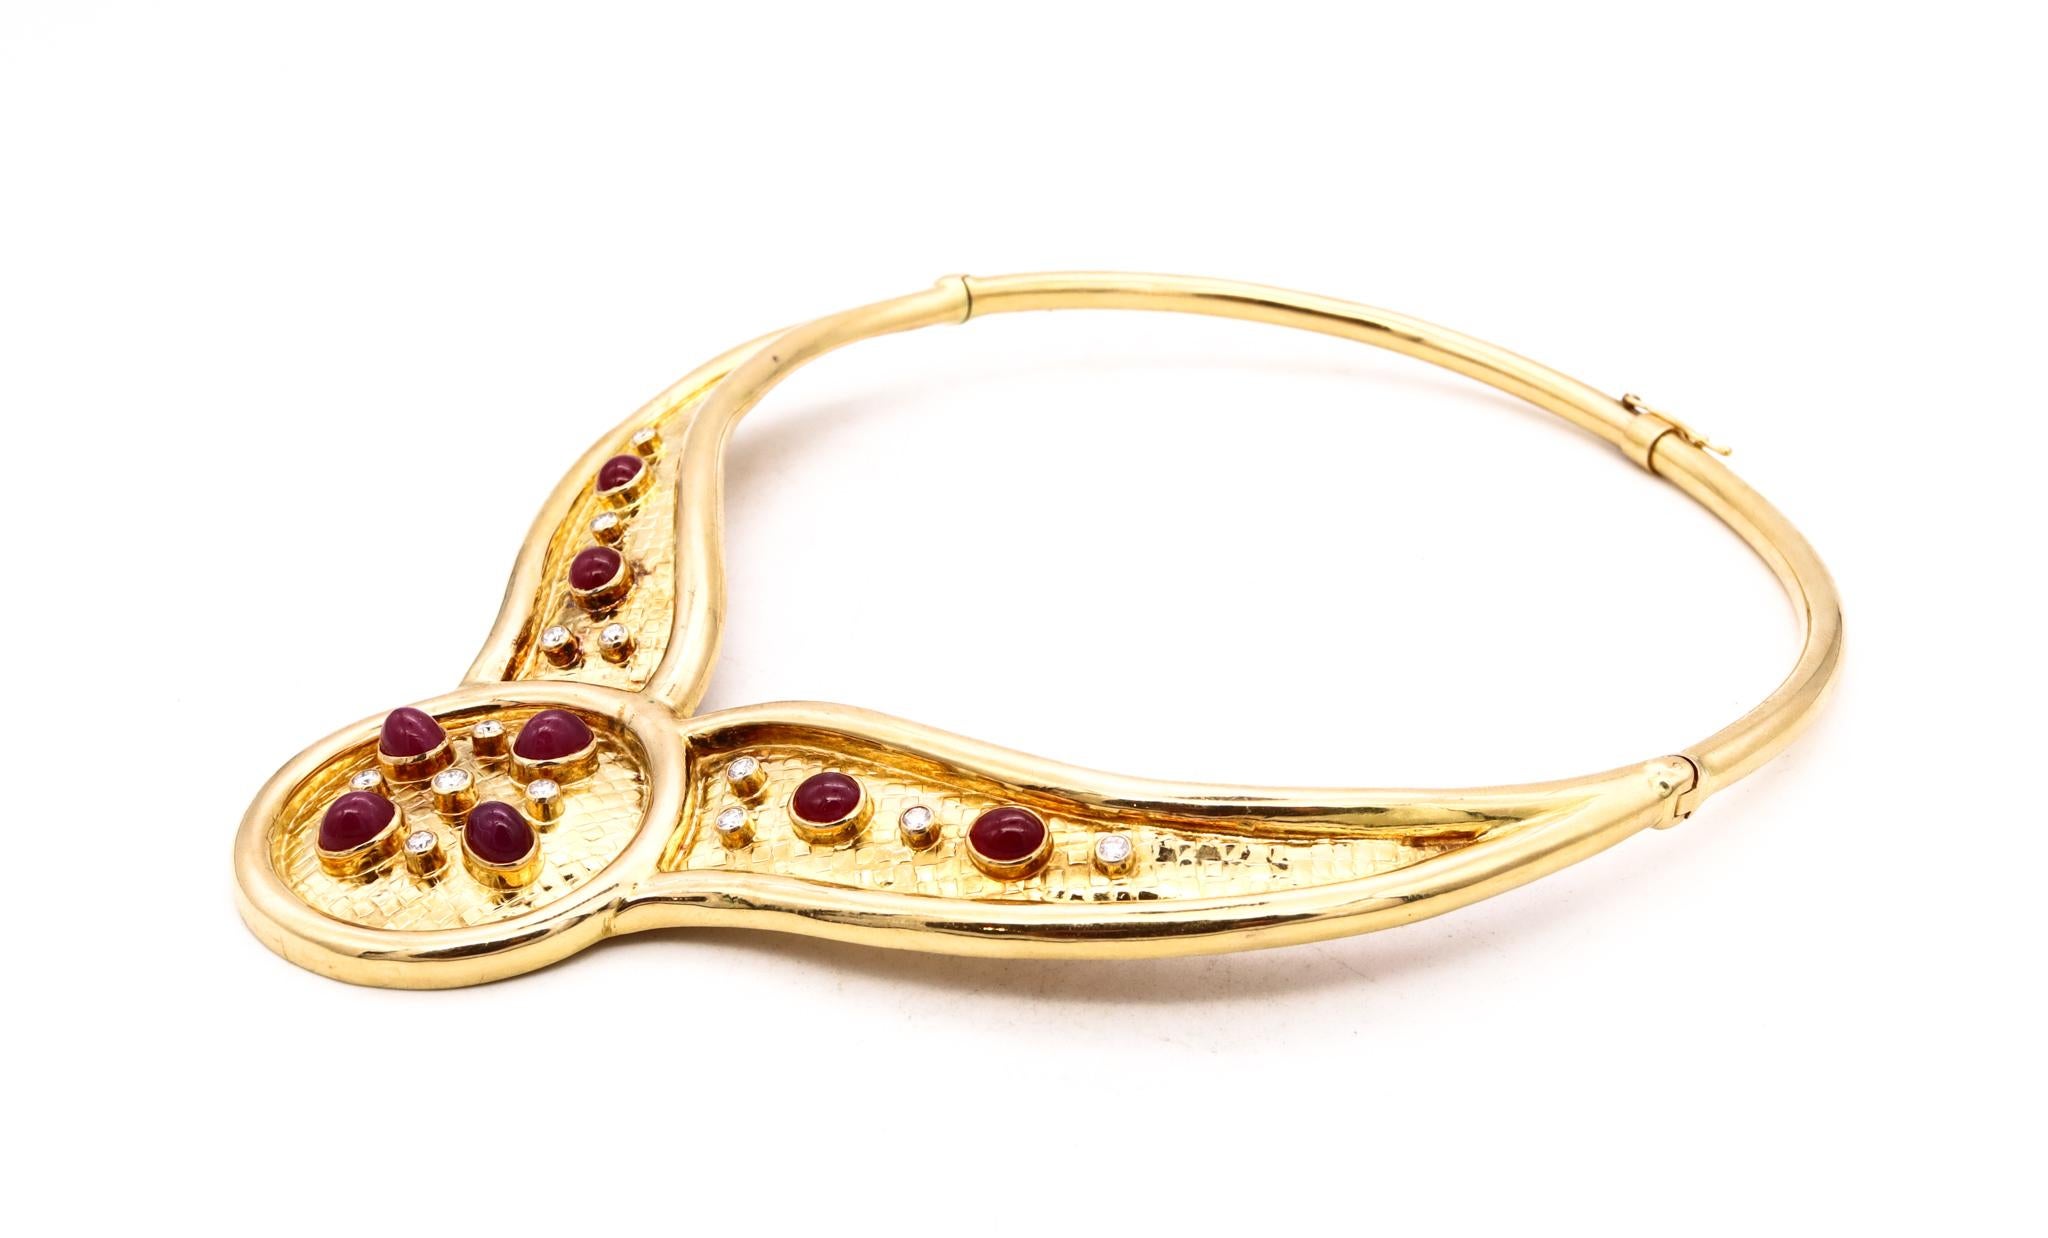 Lalaounis Greece Choker Necklace 18Kt Yellow Gold With 16.67 Cts Diamonds Rubies For Sale 3